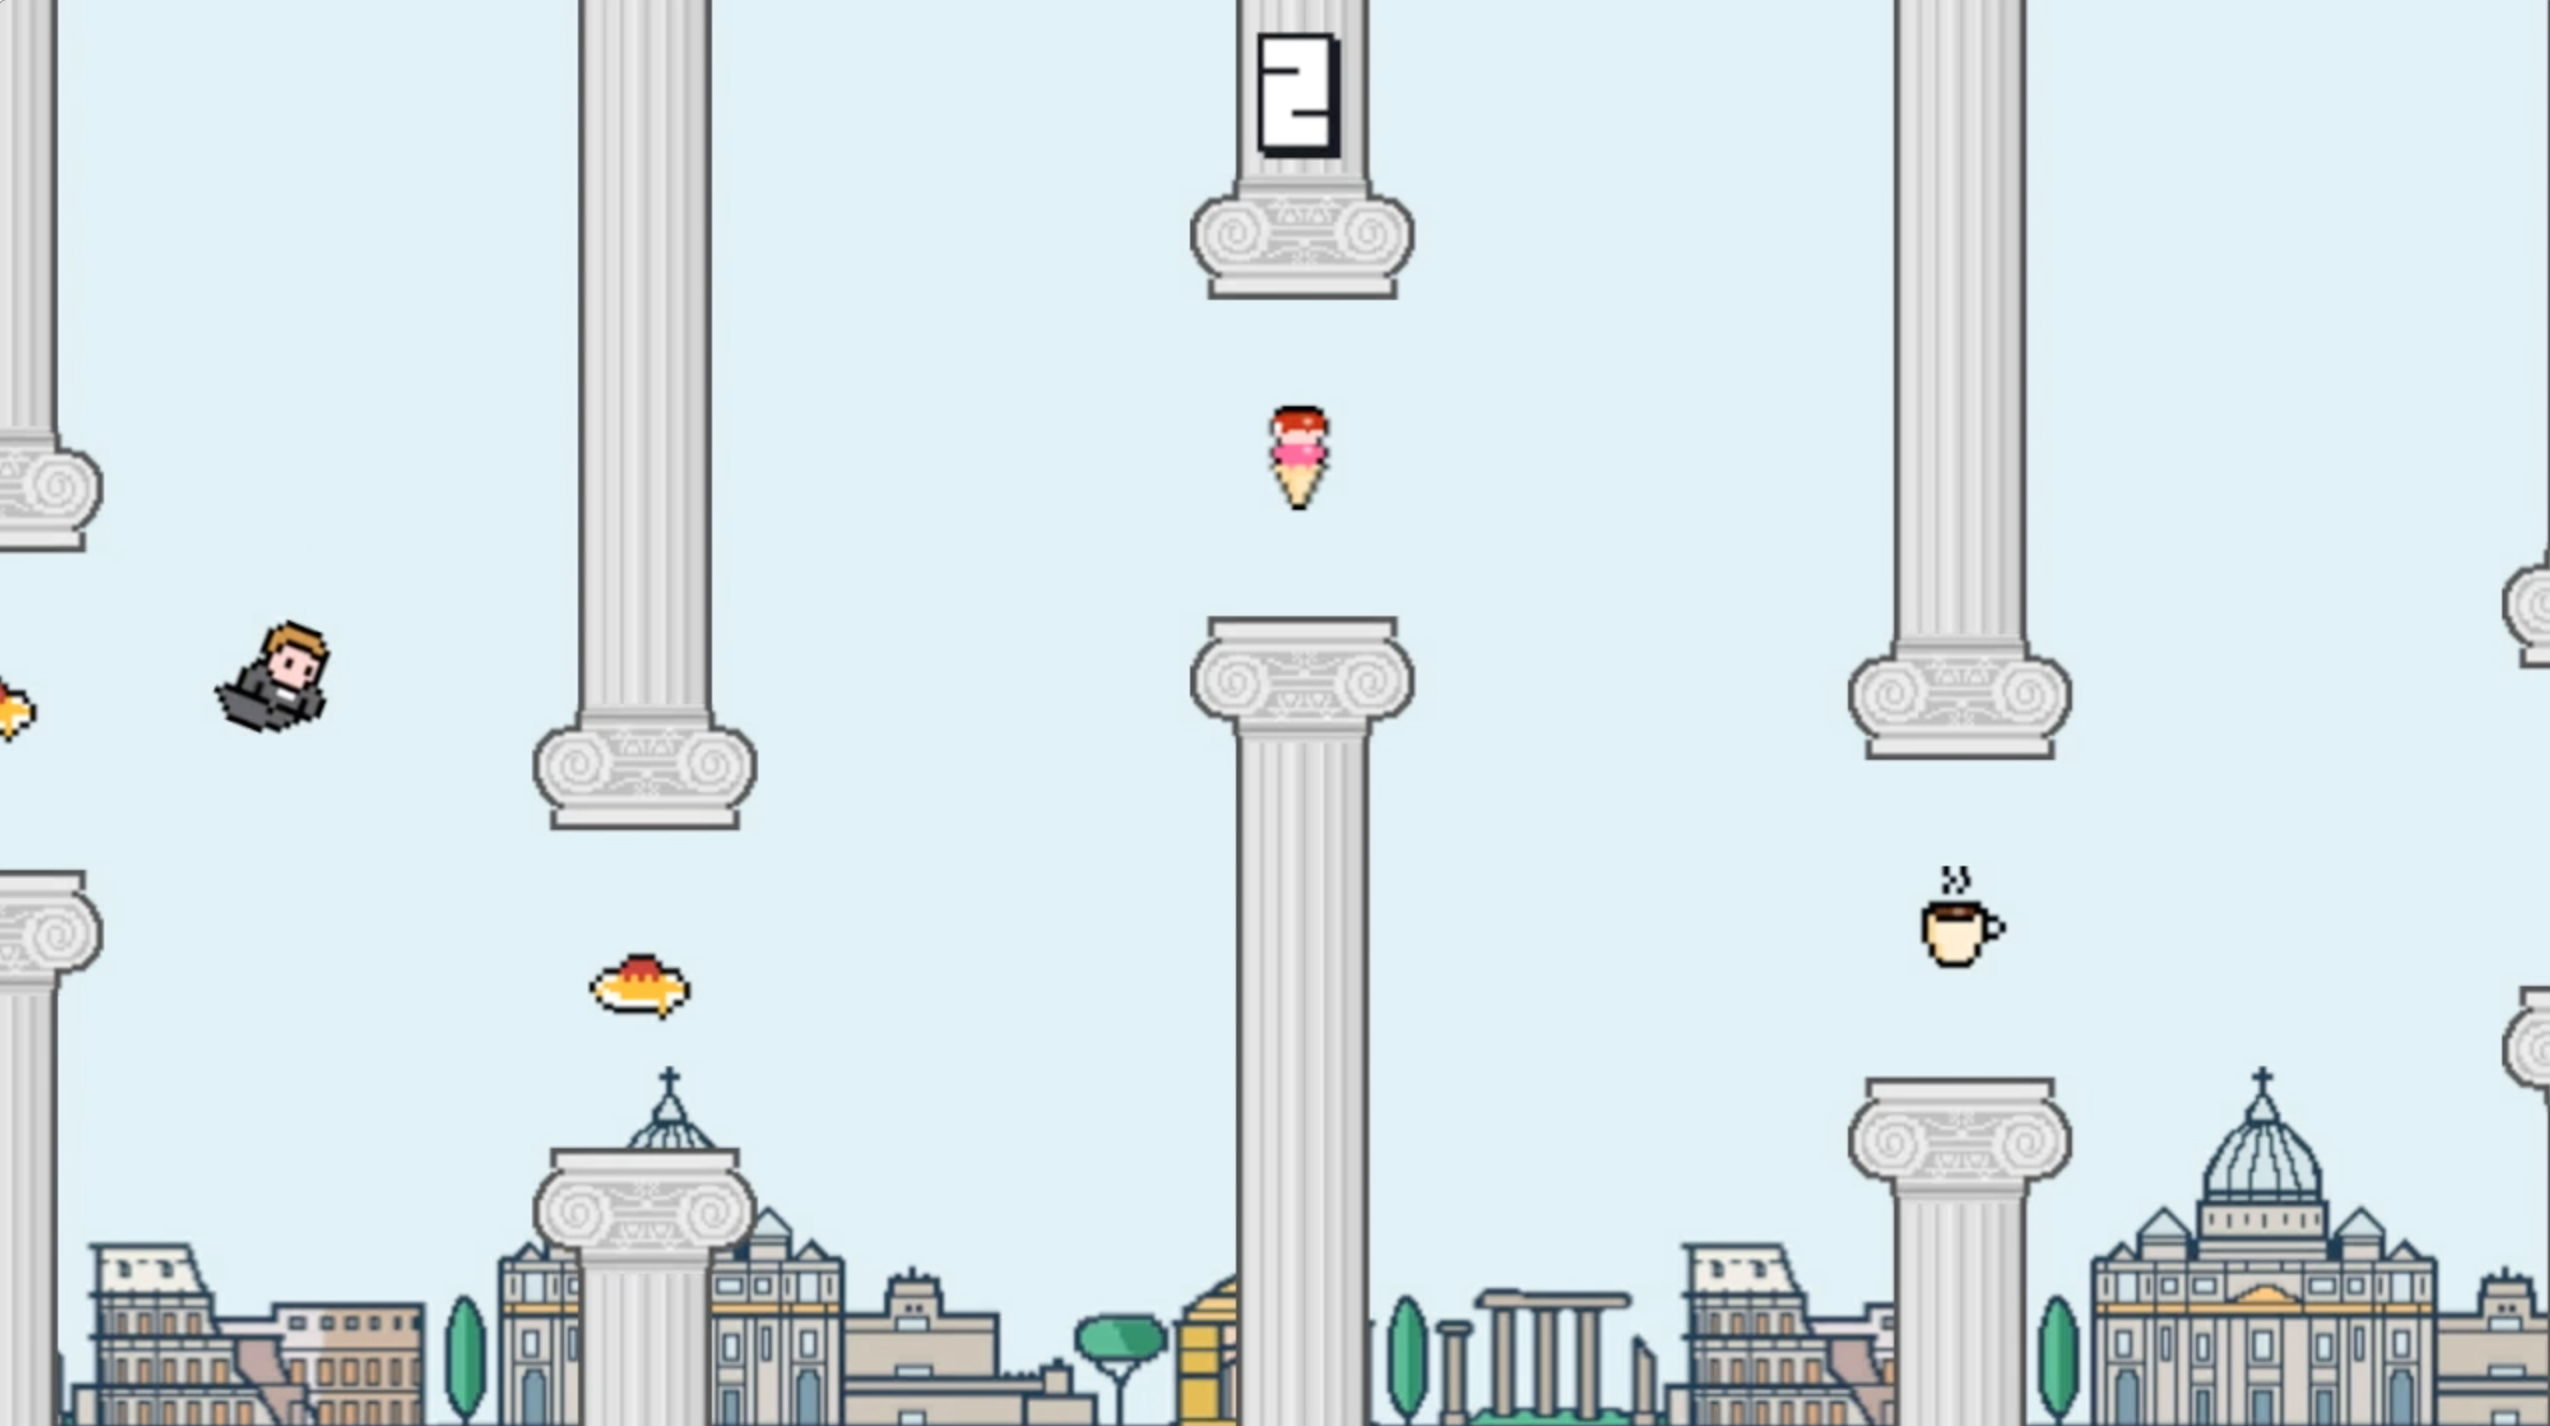 An image of some 8 bit computer art depicting 2d buildings and pillars. Some characters fly between the pillars to take different items.